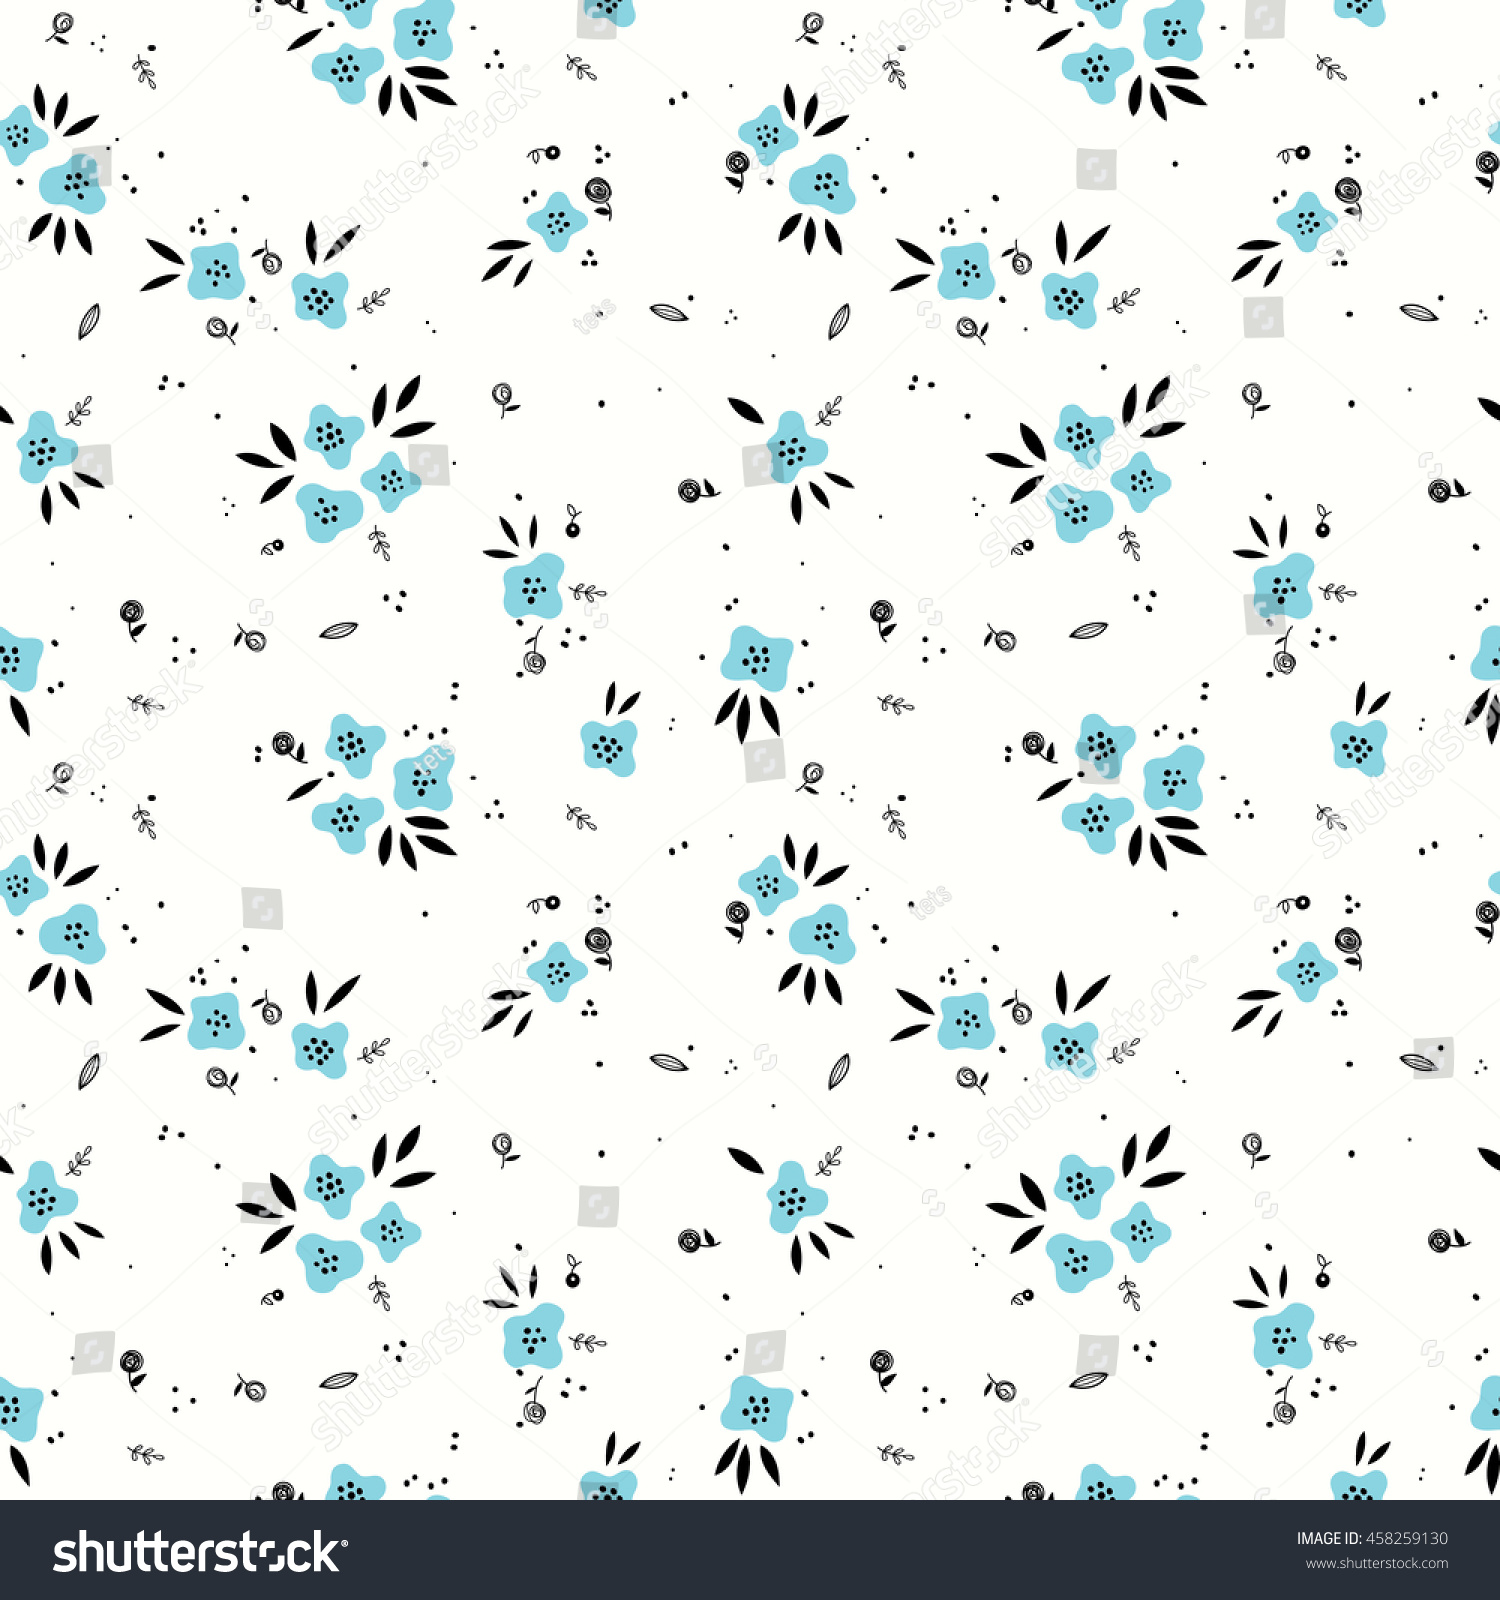 Cute Seamless Vector Floral Pattern Stock Vector (Royalty Free ...